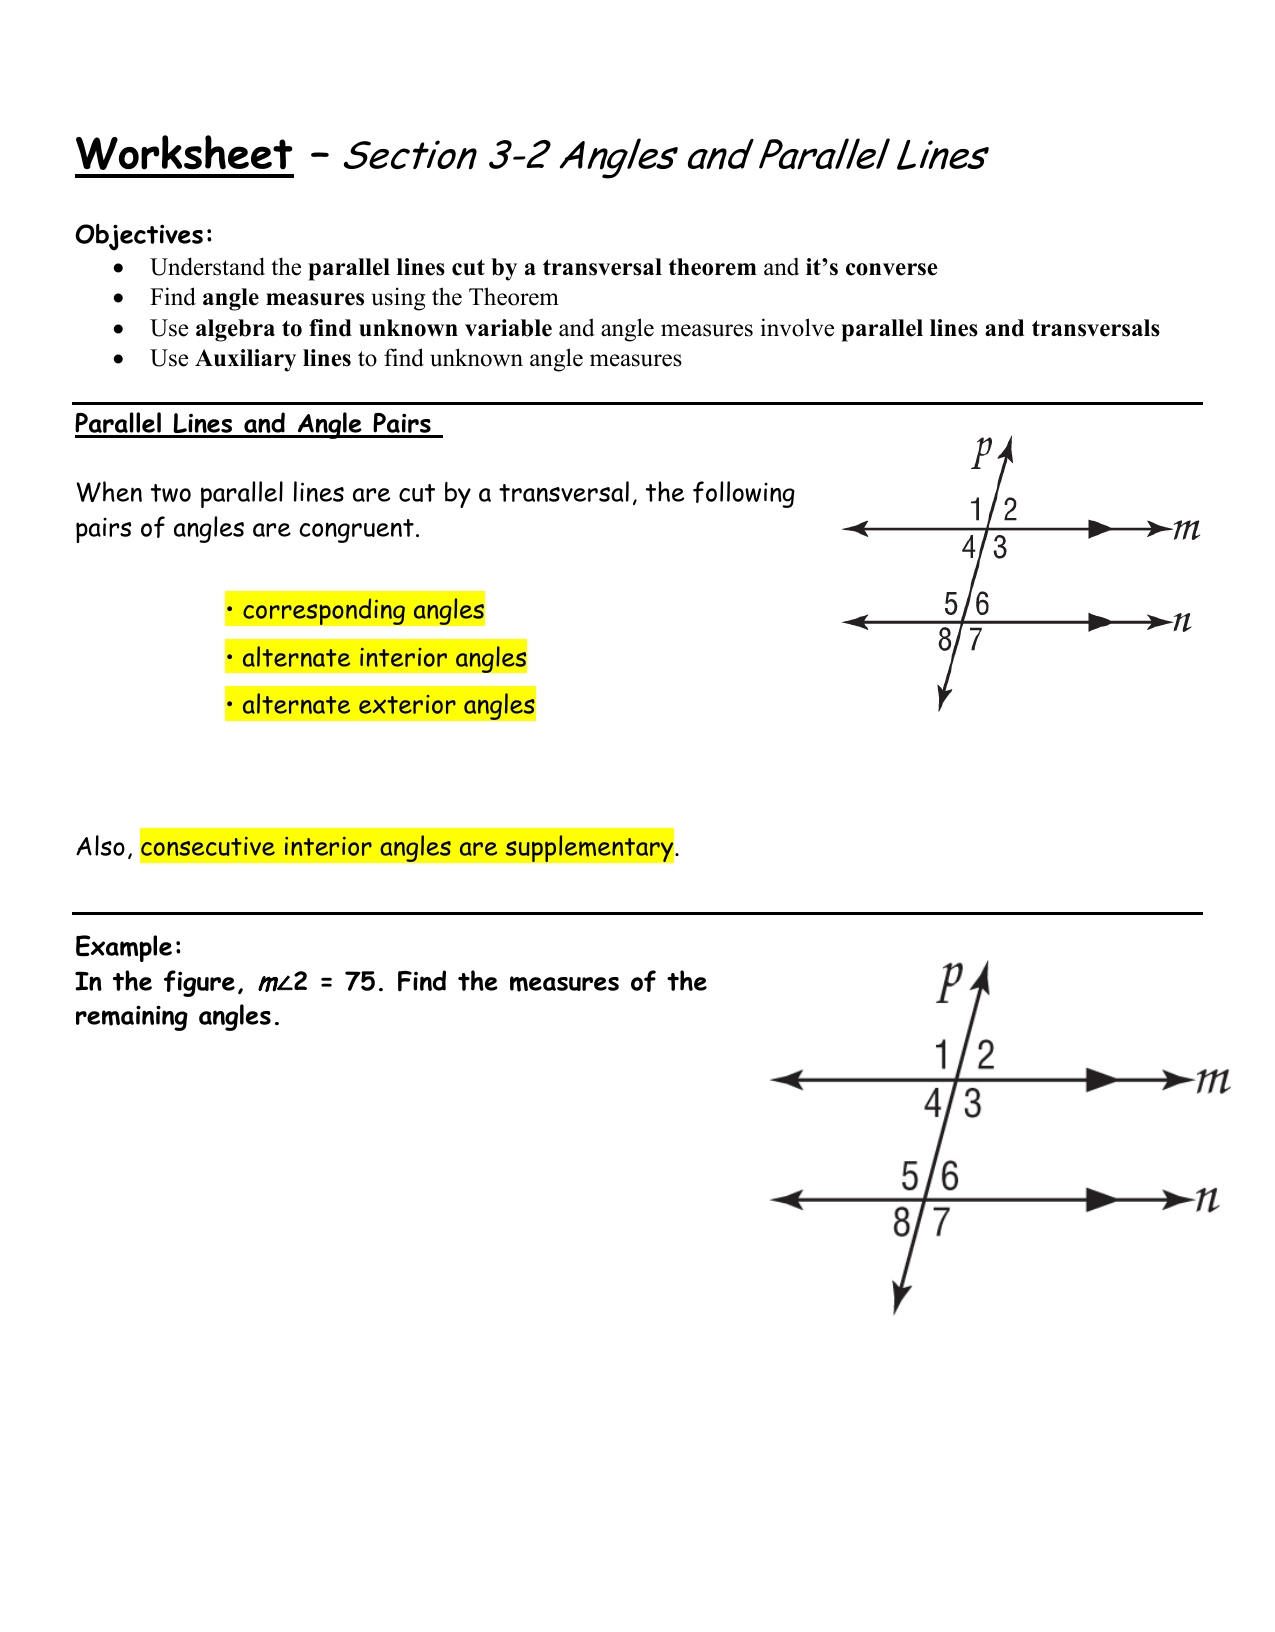 Worksheet Section 20 Angles and Parallel Lines For Finding Angle Measures Worksheet